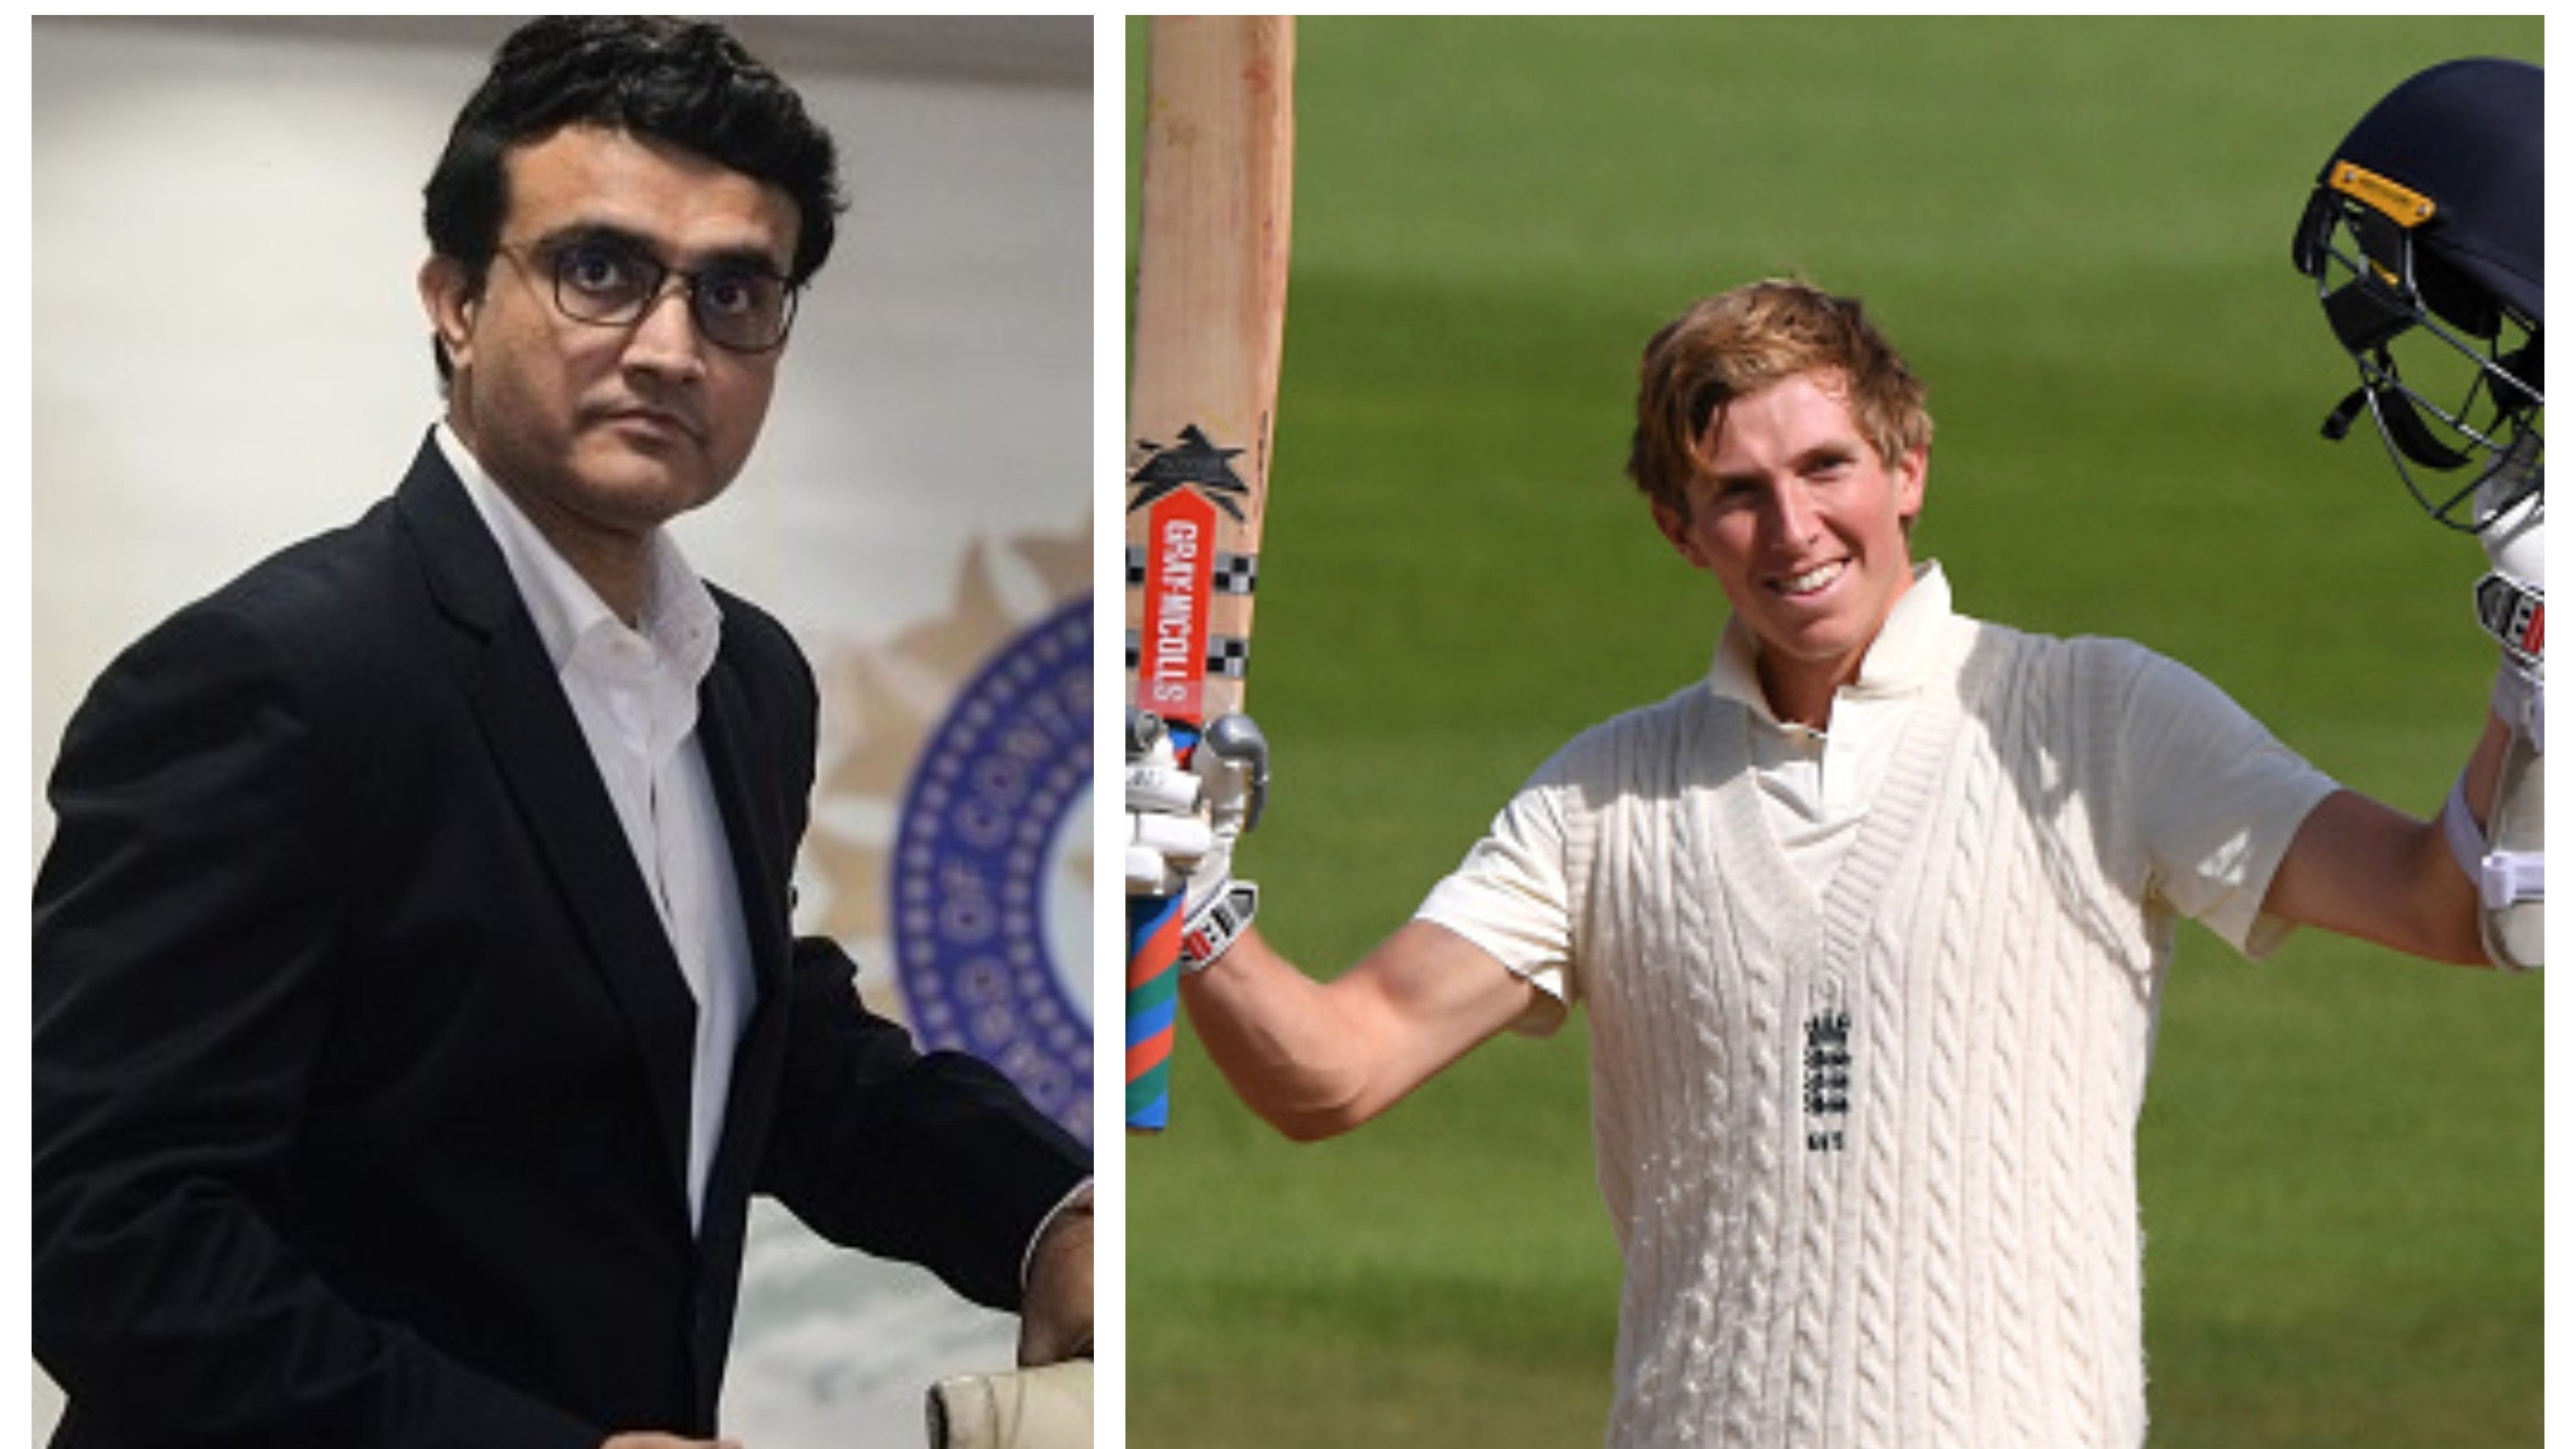 ENG v PAK 2020: ‘Looks a class player’, Sourav Ganguly hails Zak Crawley after his double ton in 3rd Test